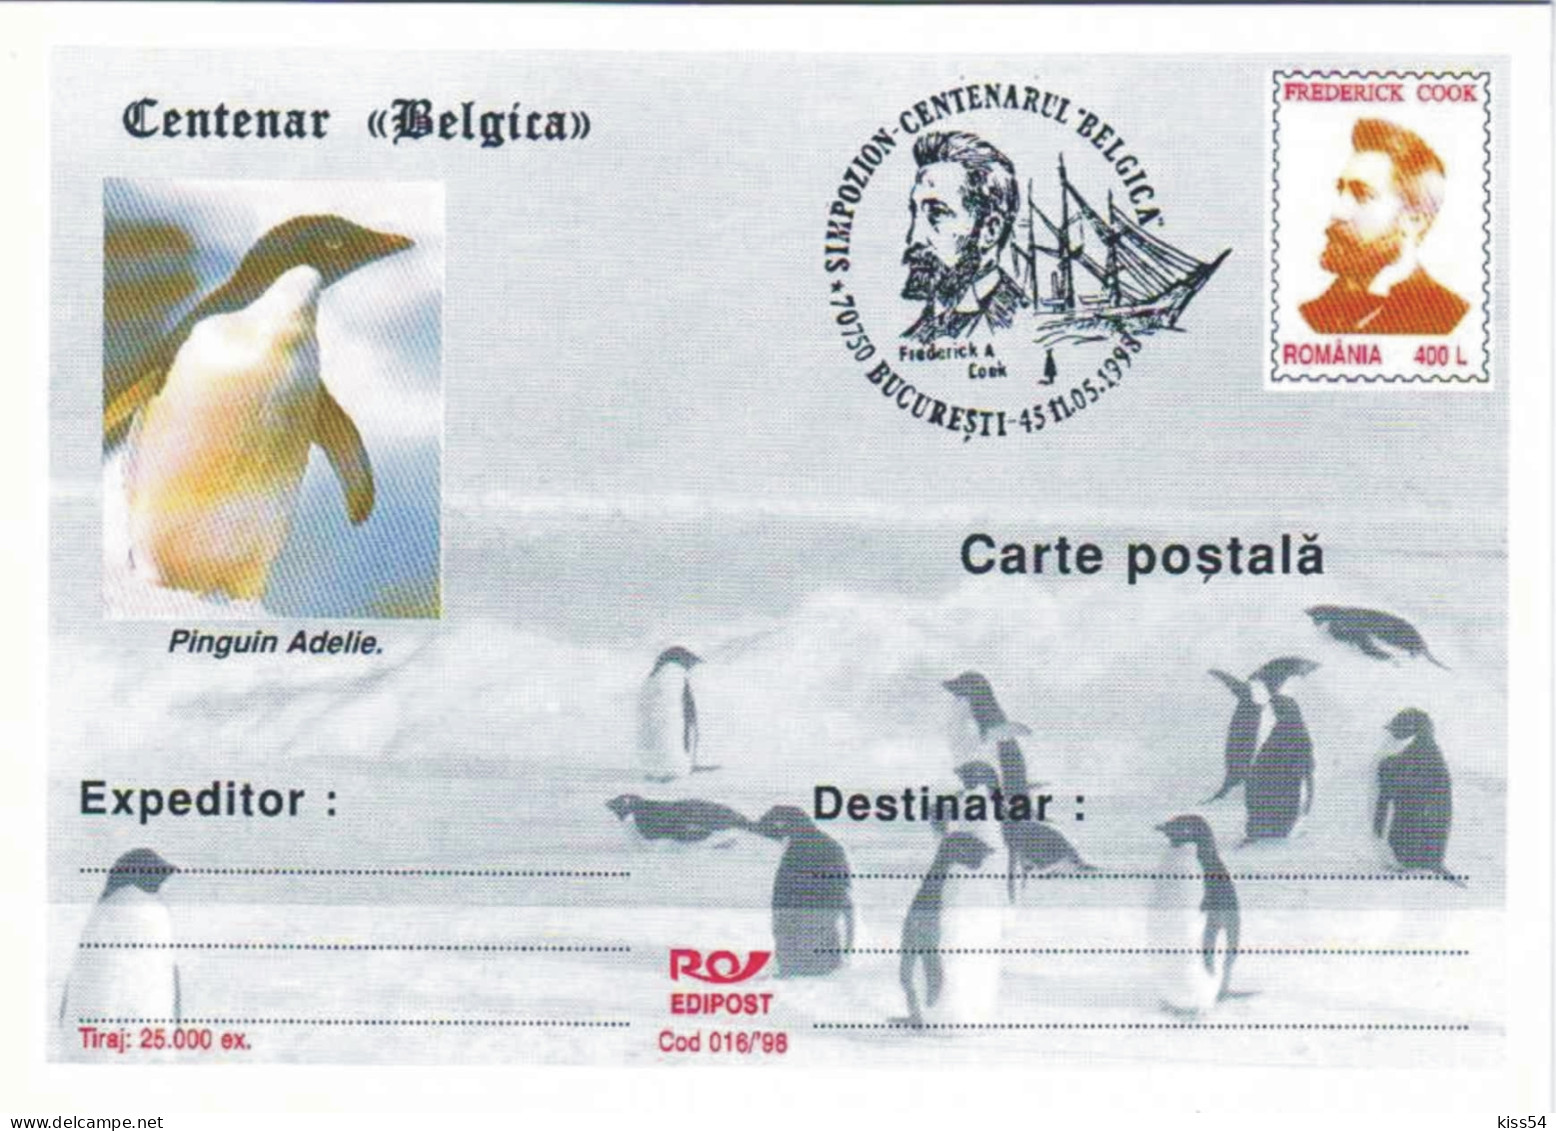 IP 98 - 016 FREDERICK COOK, Pinguins - Stationery, Special Cancellation - Used - 1998 - Polarforscher & Promis